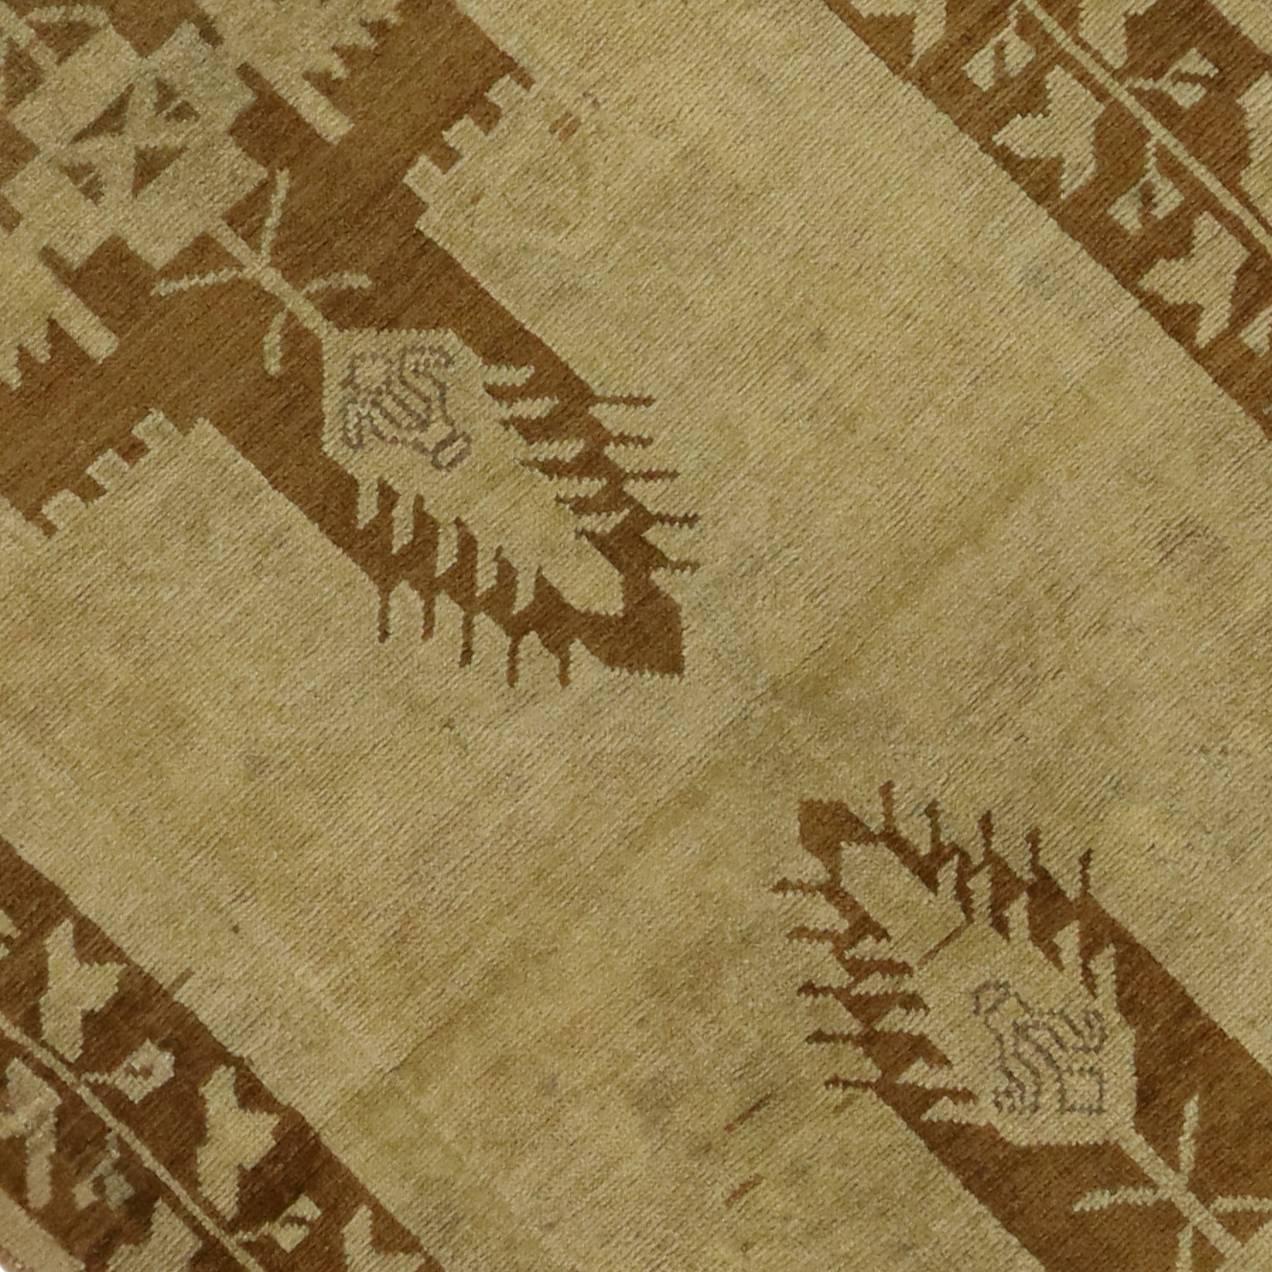 Vintage Turkish Oushak Runner with Warm, Neutral Colors, Hallway Runner For Sale 3